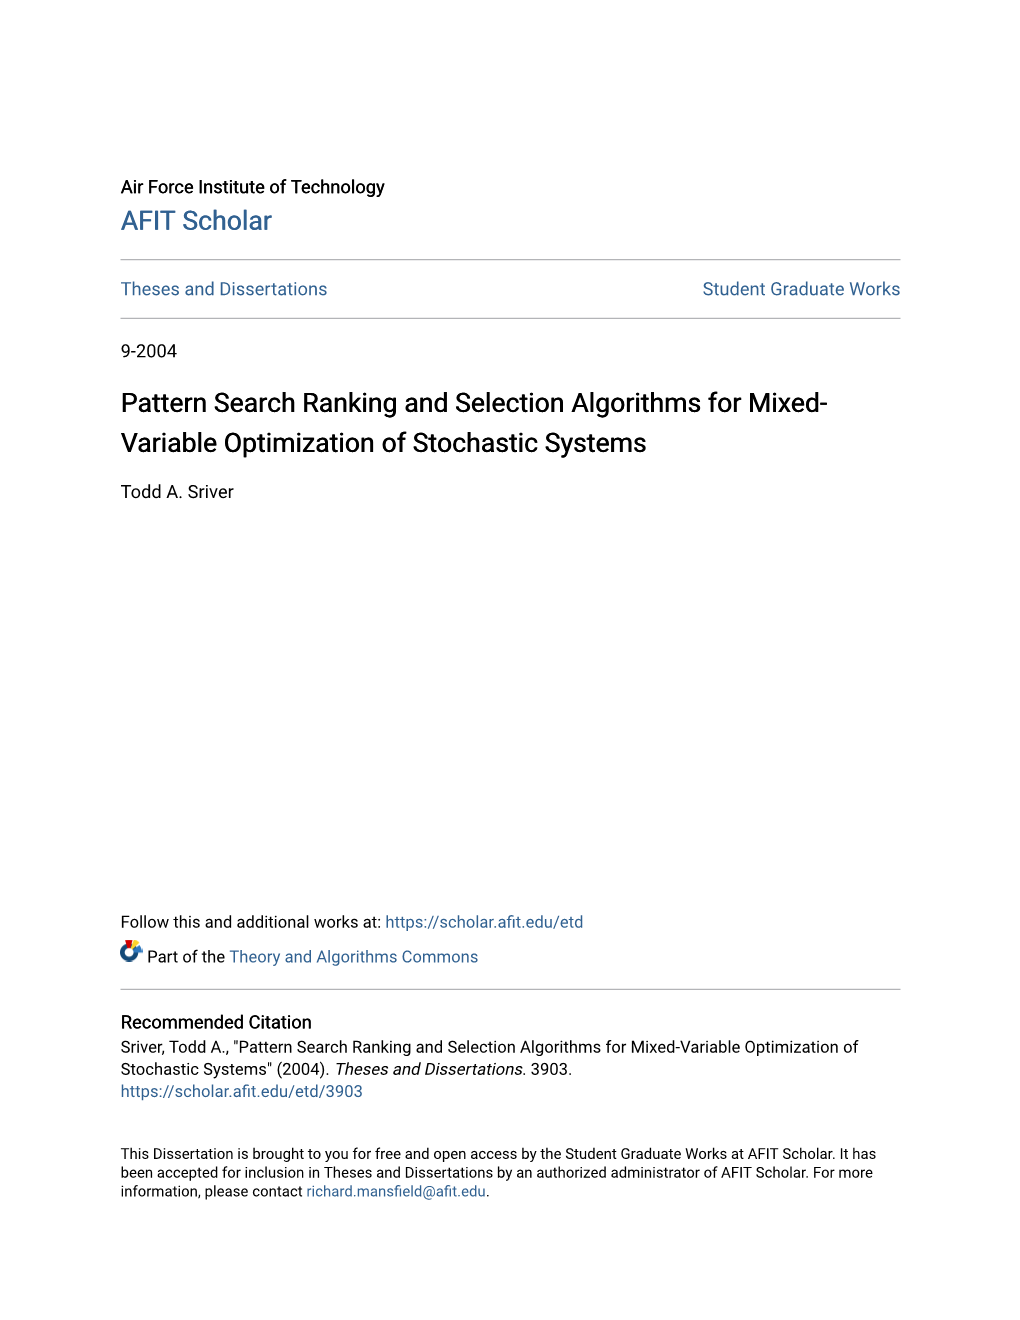 Pattern Search Ranking and Selection Algorithms for Mixed-Variable Optimization of Stochastic Systems" (2004)